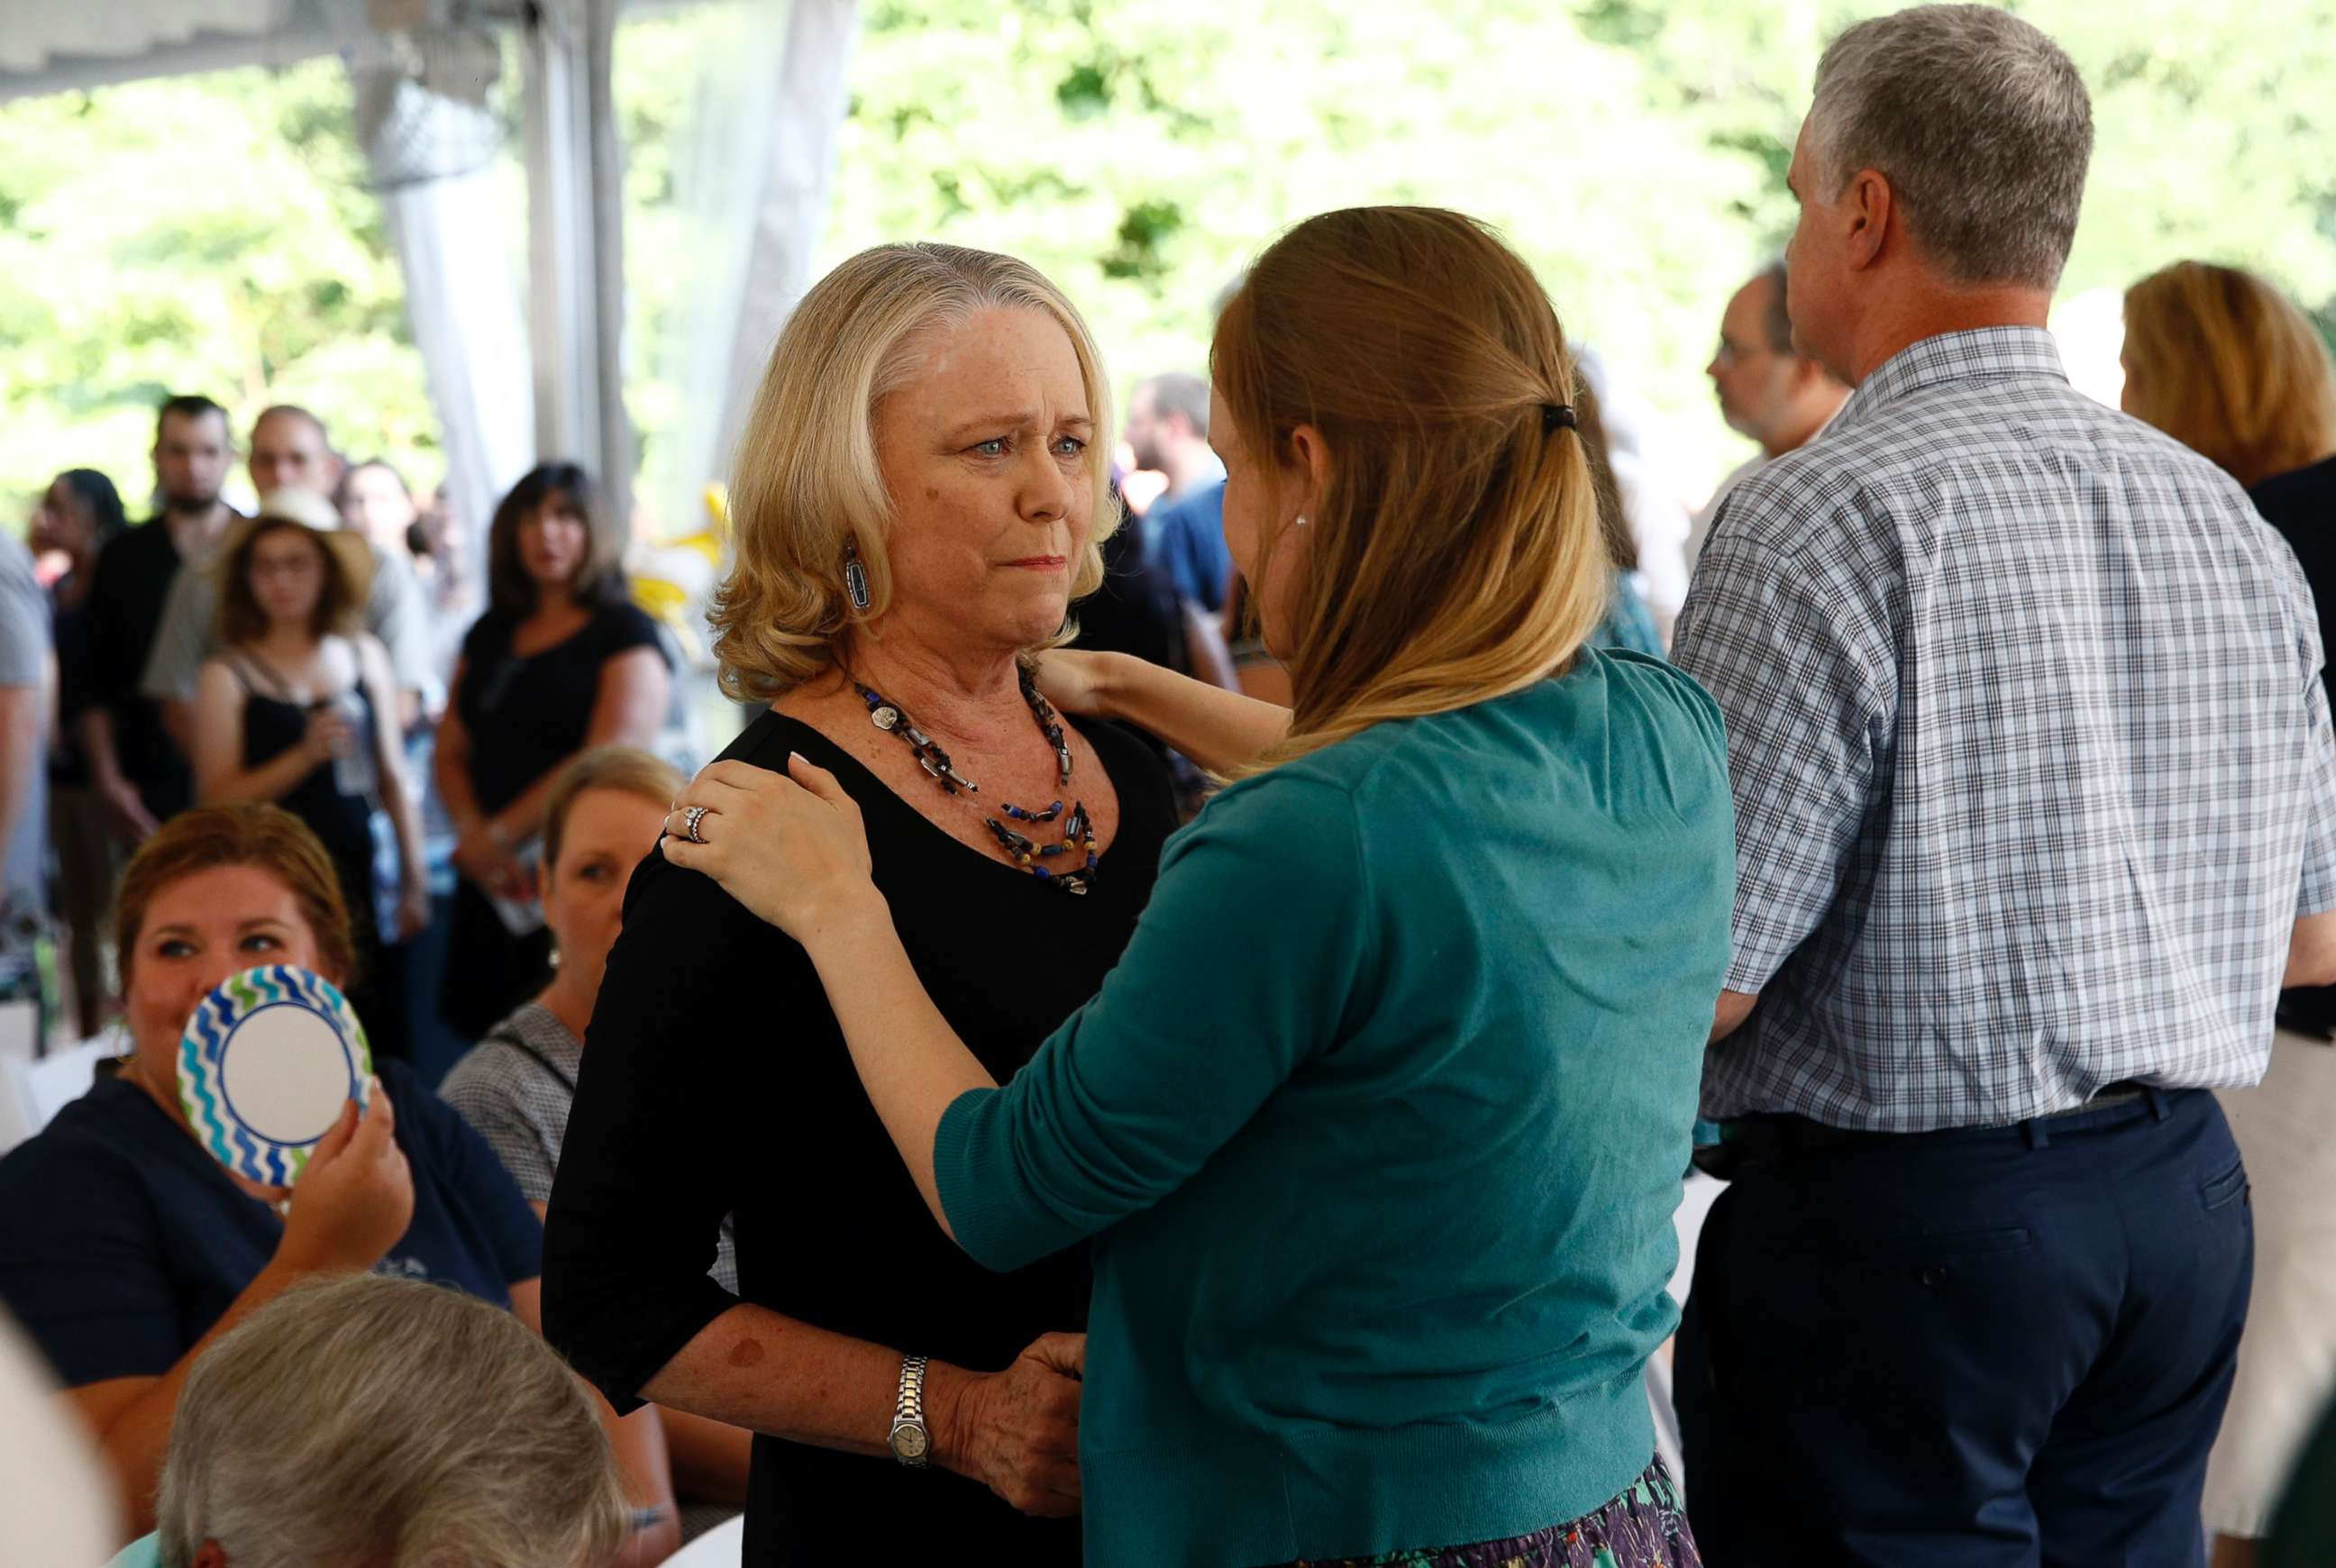 PHOTO: Judy Hiaasen, left, sister of Rob Hiaasen, one of the journalists killed in the shooting at The Capital Gazette newspaper offices, speaks with a mourner during a memorial service, July 2, 2018, in Owings Mills, Md.